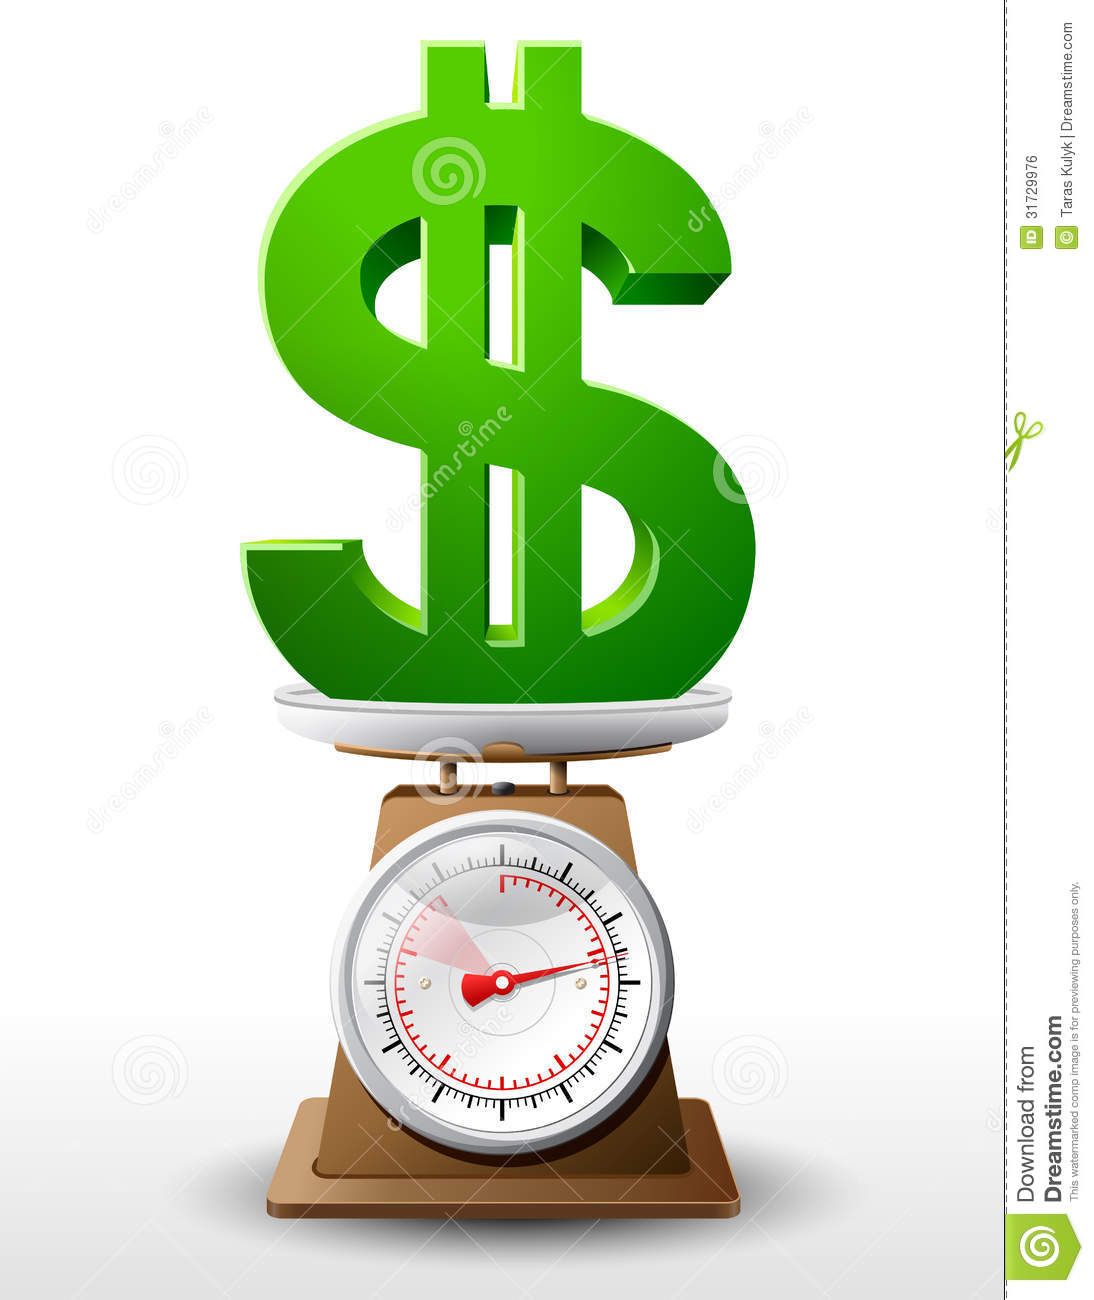 Dollar Sign On Scale Pan Royalty Free Stock Image   Image  31729976